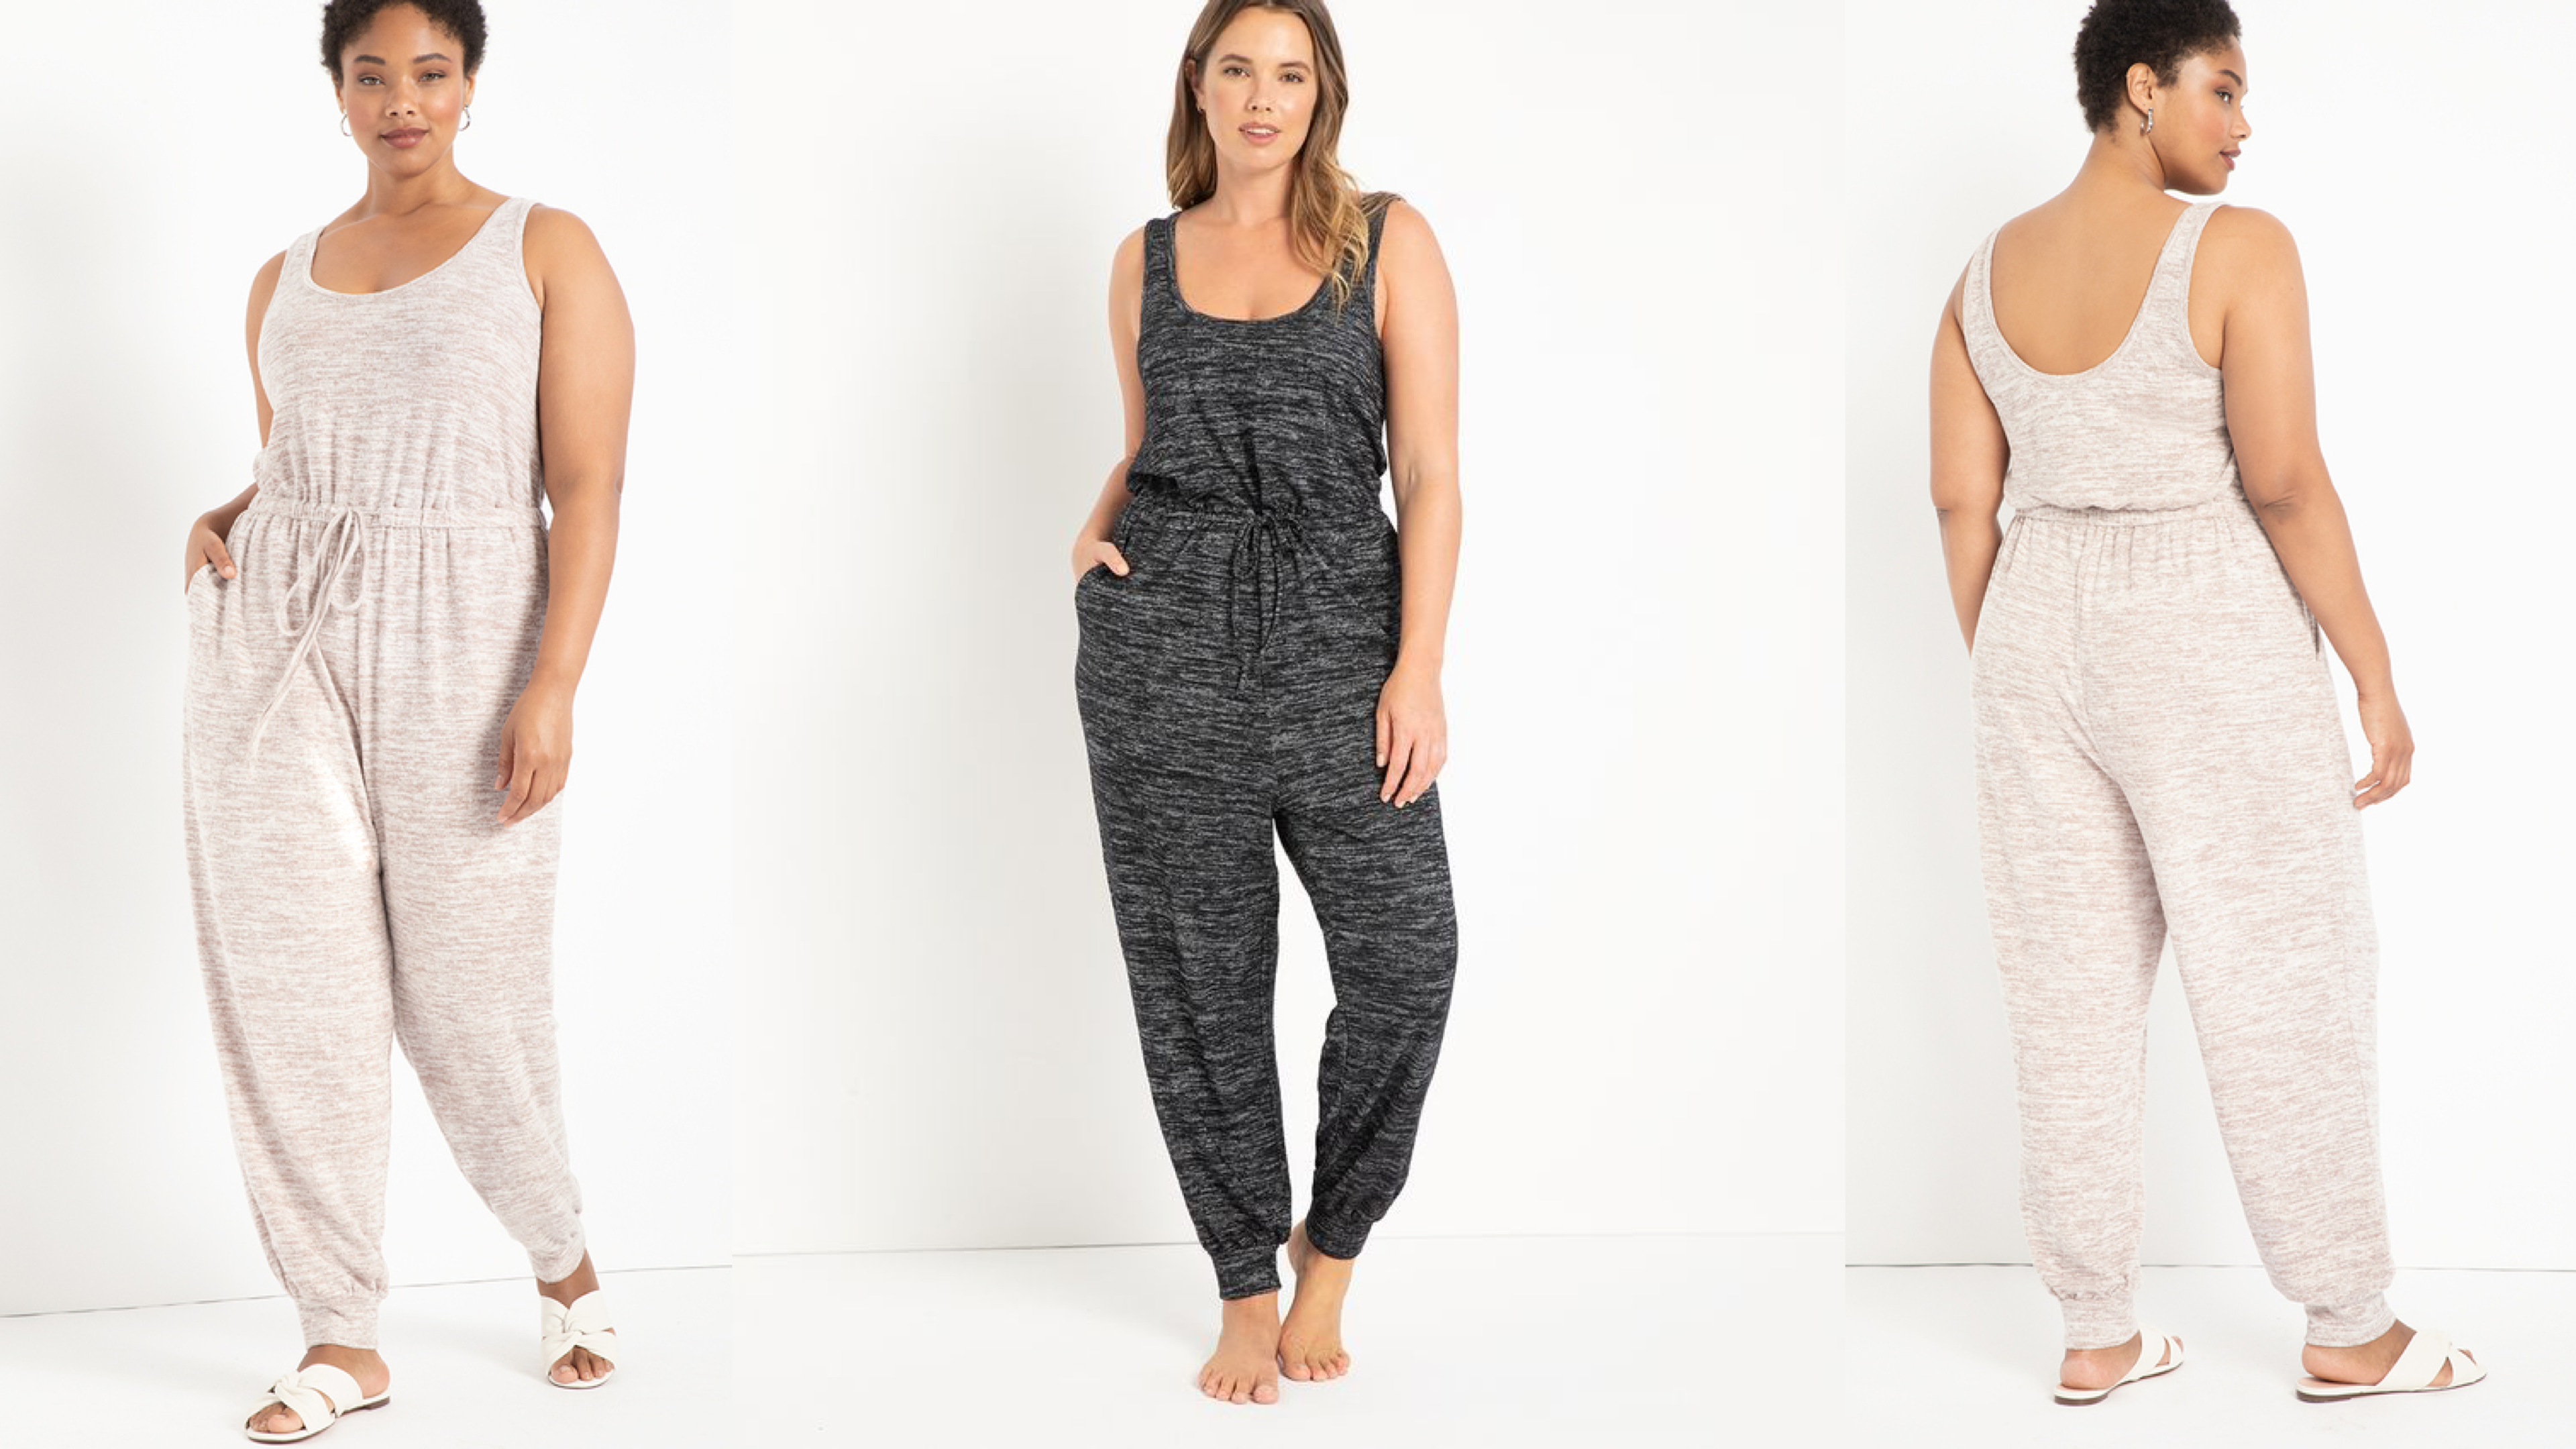 An all-purpose jumpsuit